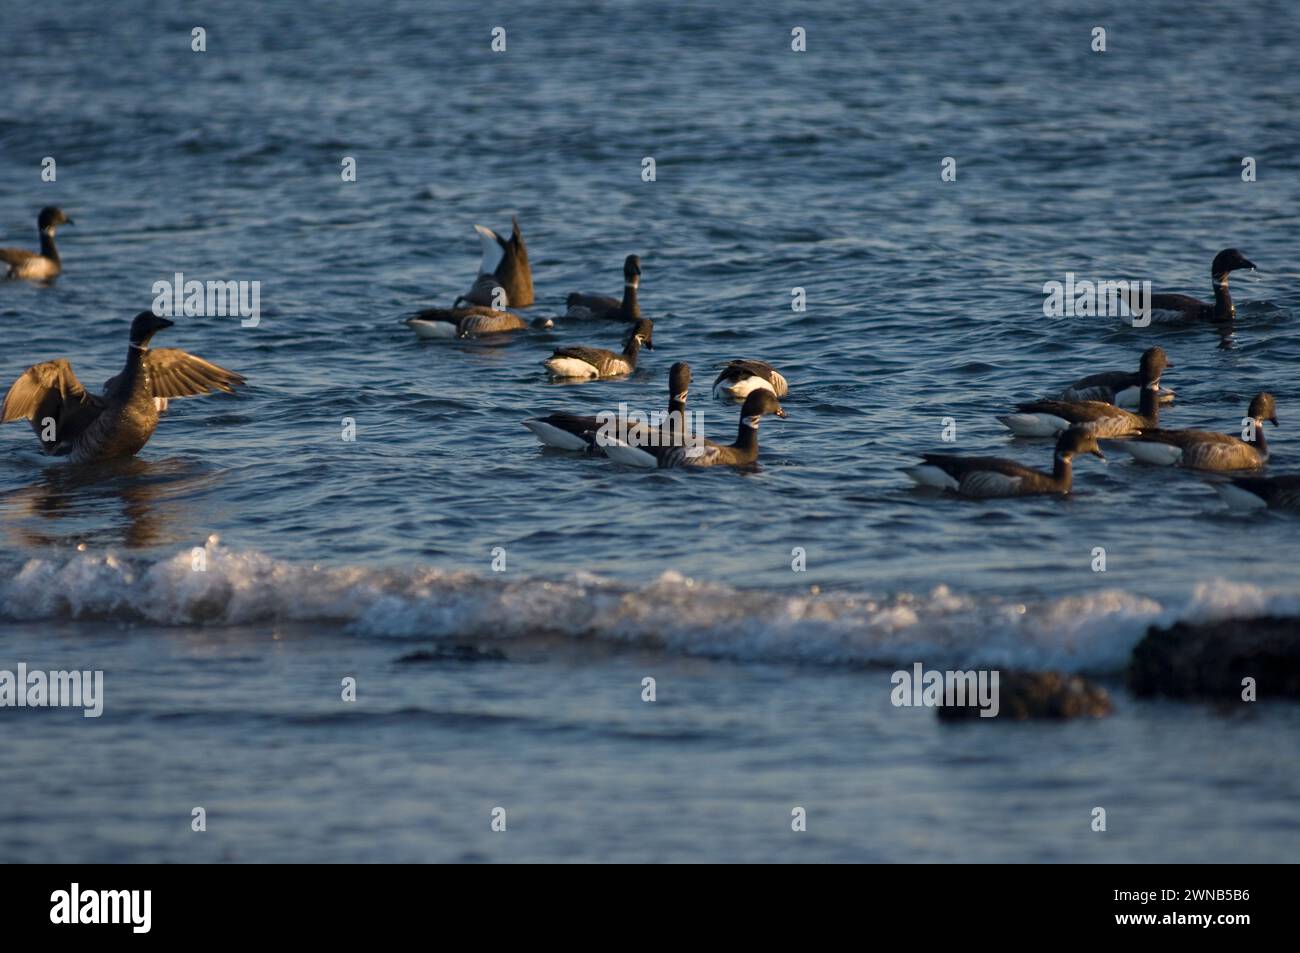 Brant geese Branta bernicla nigricans feeding resting traveling along the rocky shores Puget Sound Salish Sea migration stop Discovery park Washington Stock Photo